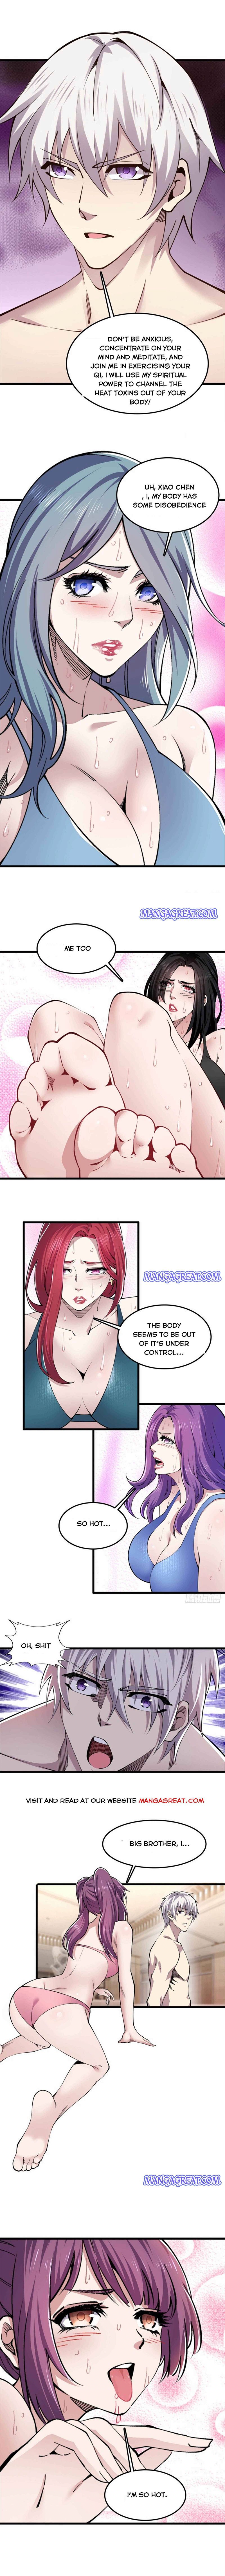 Vengeance Of The Reawakened Sword God Chapter 56 page 4